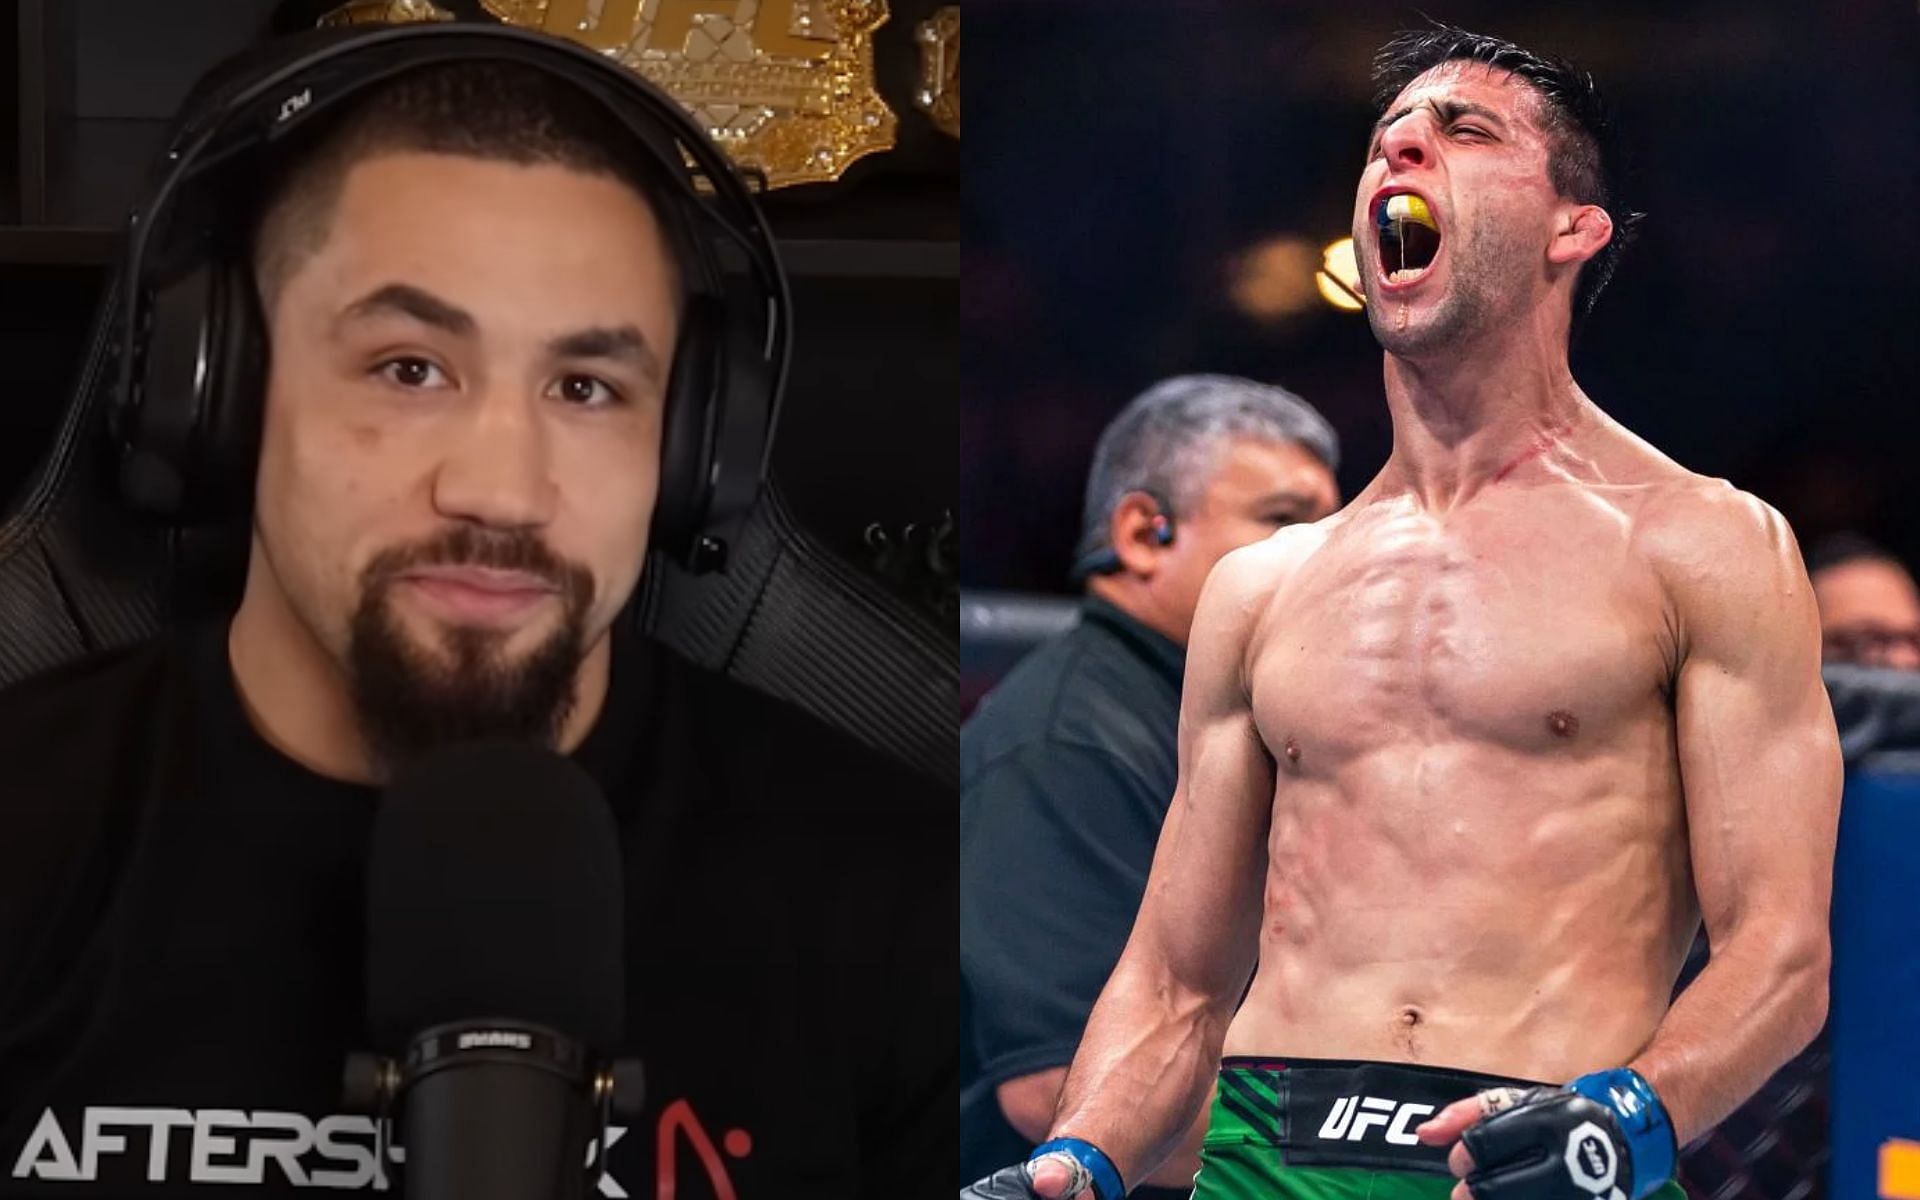 Robert Whittaker discusses UFC 301 main event, says Steve Erceg can pull off huge upset over Alexandre Pantoja [Image courtesy: MMArcade Podcast - YouTube, and Getty Images]